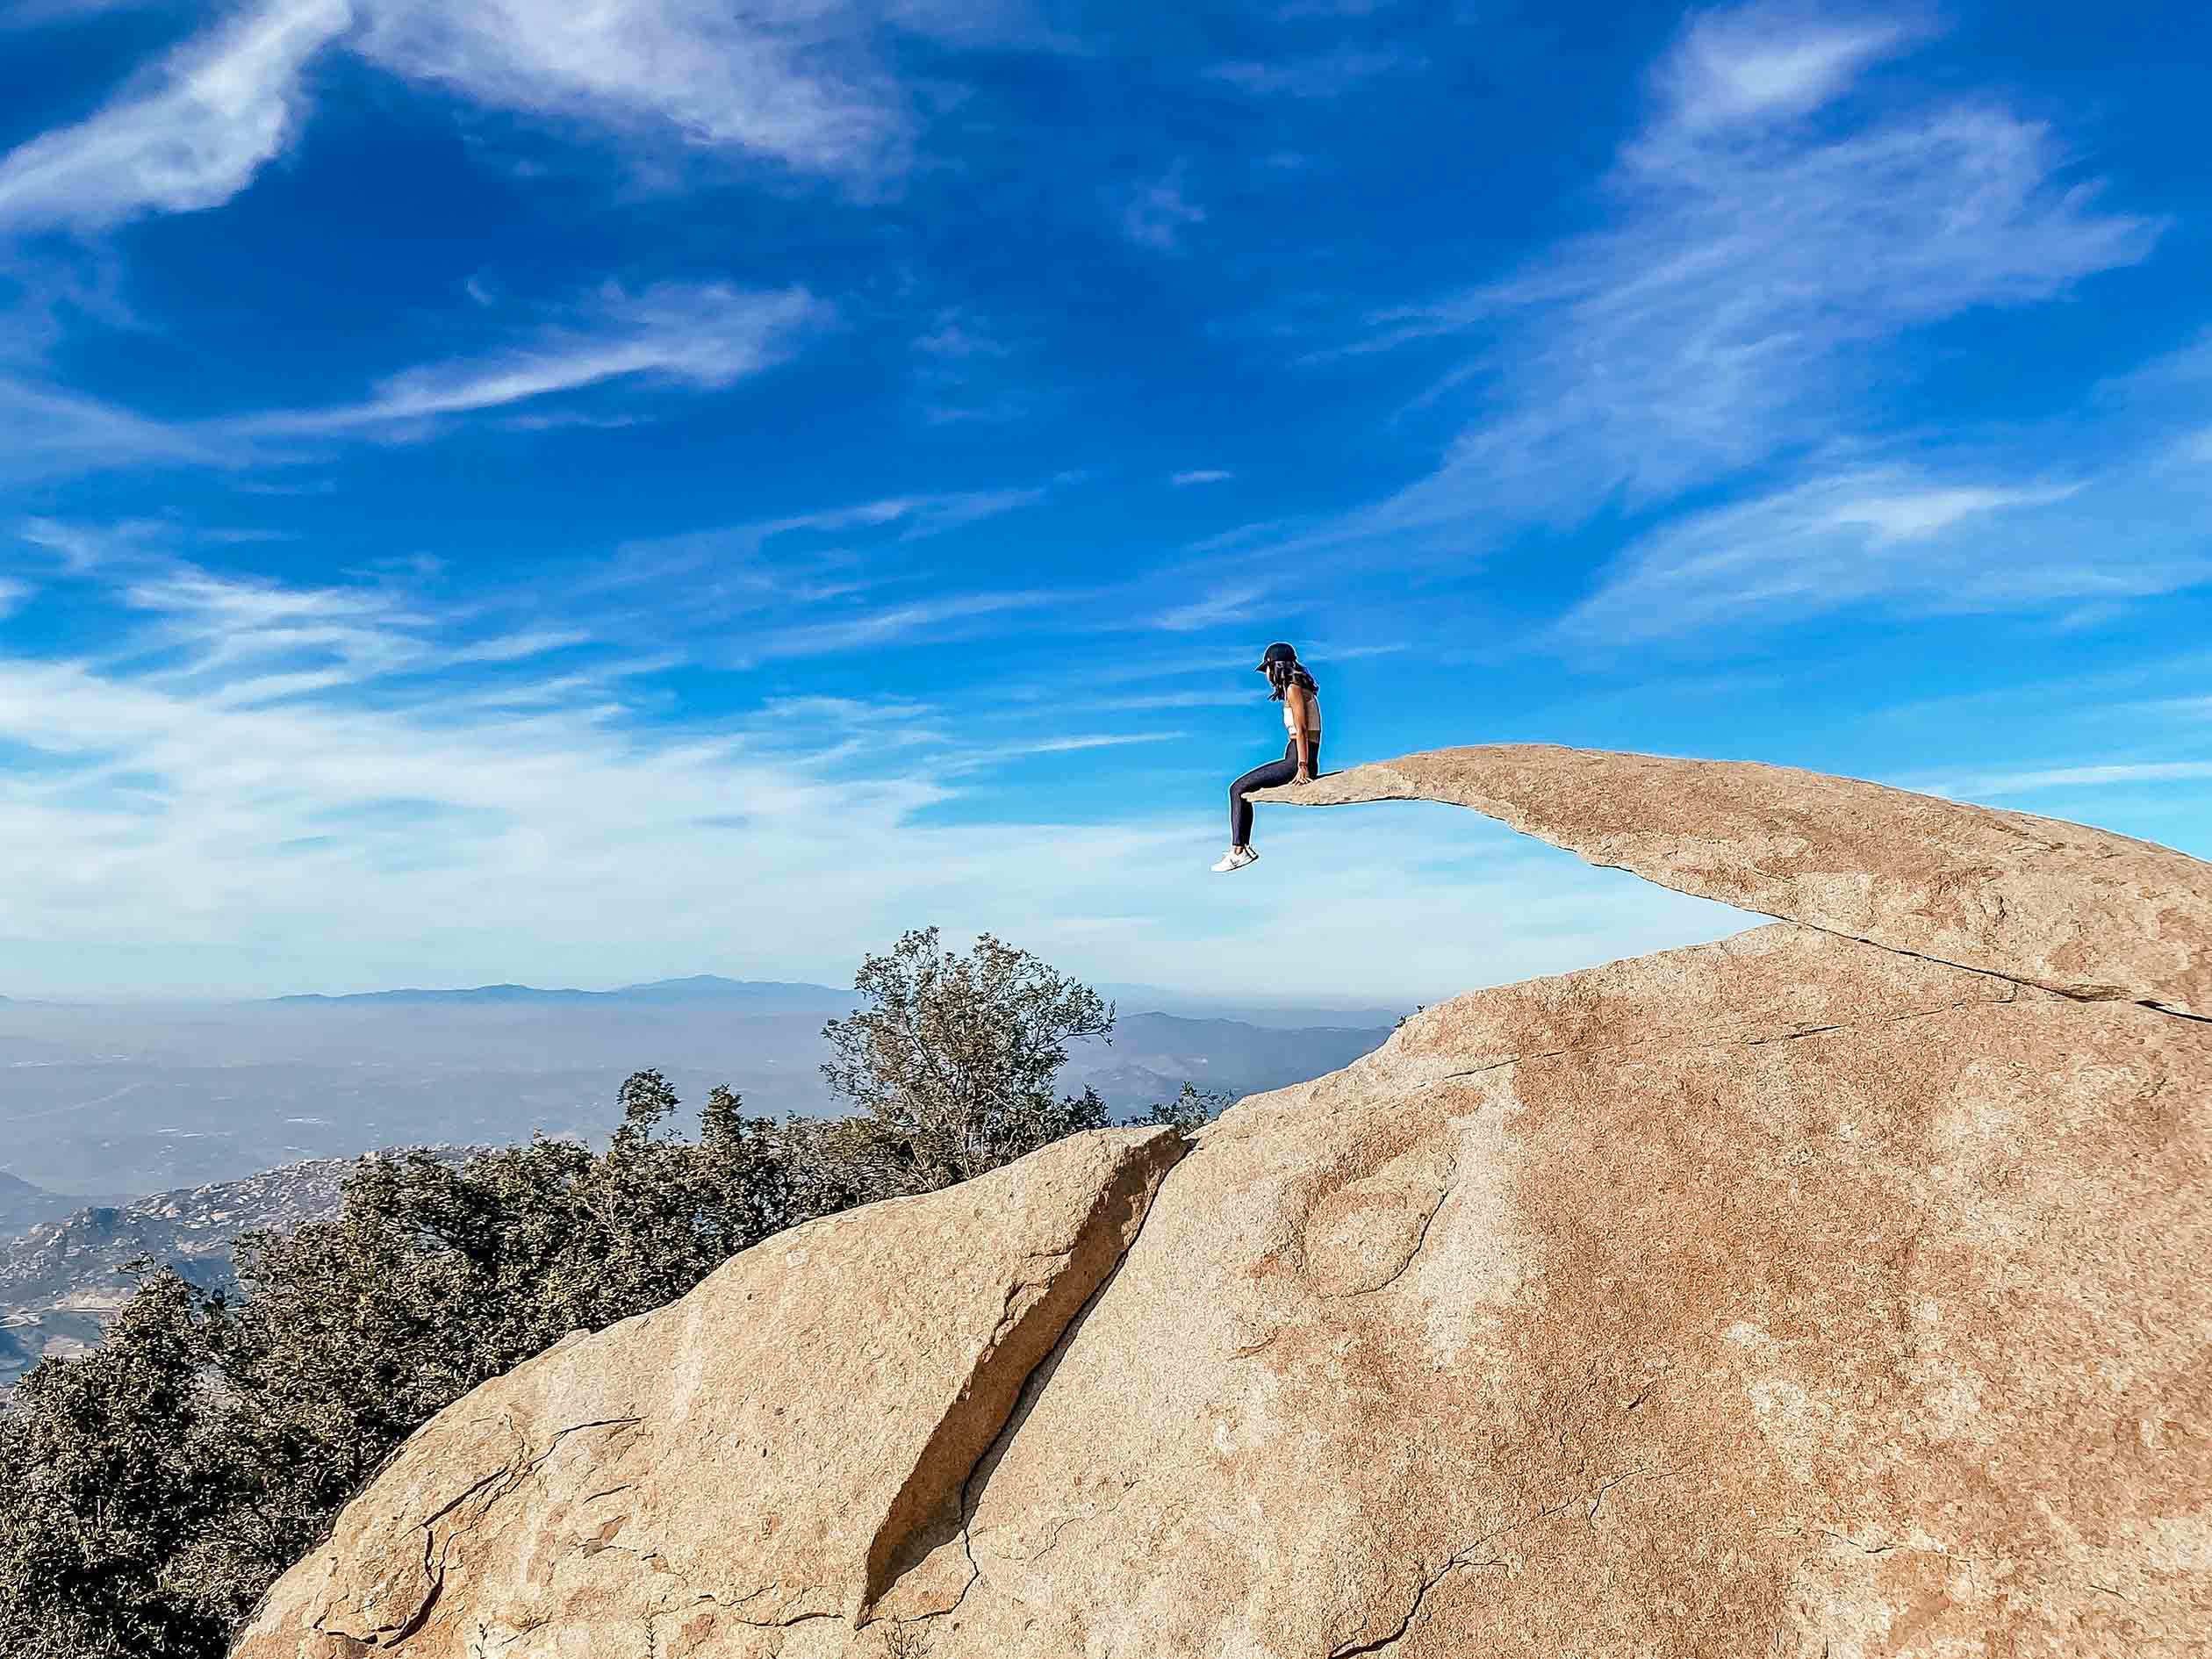 A girl sitting on top of Potato Chip Rock in San Diego, California in a sunny day with some clouds in the distance.